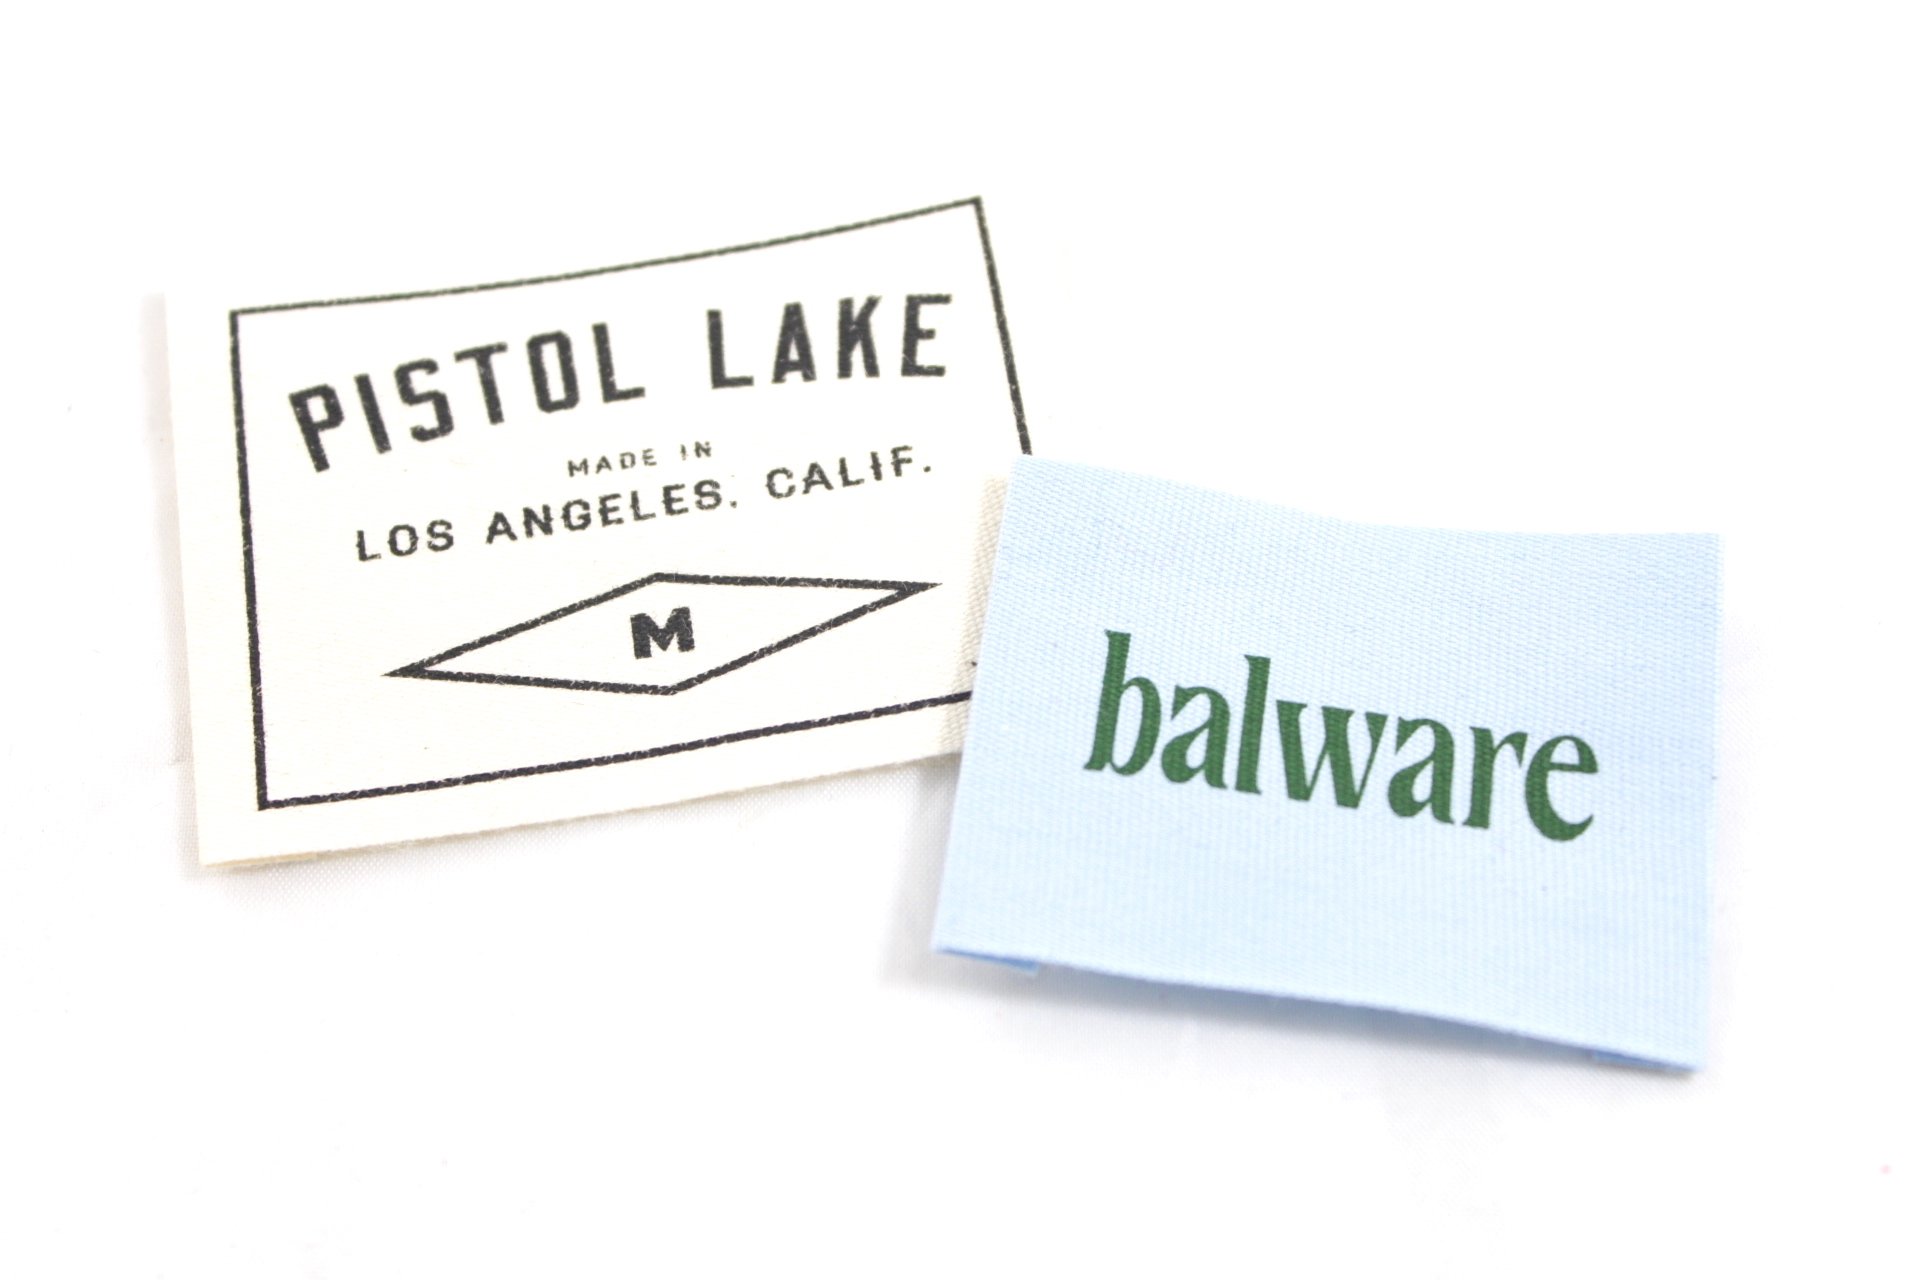 Pistol Lake white woven label next to a blue and green Balware woven label